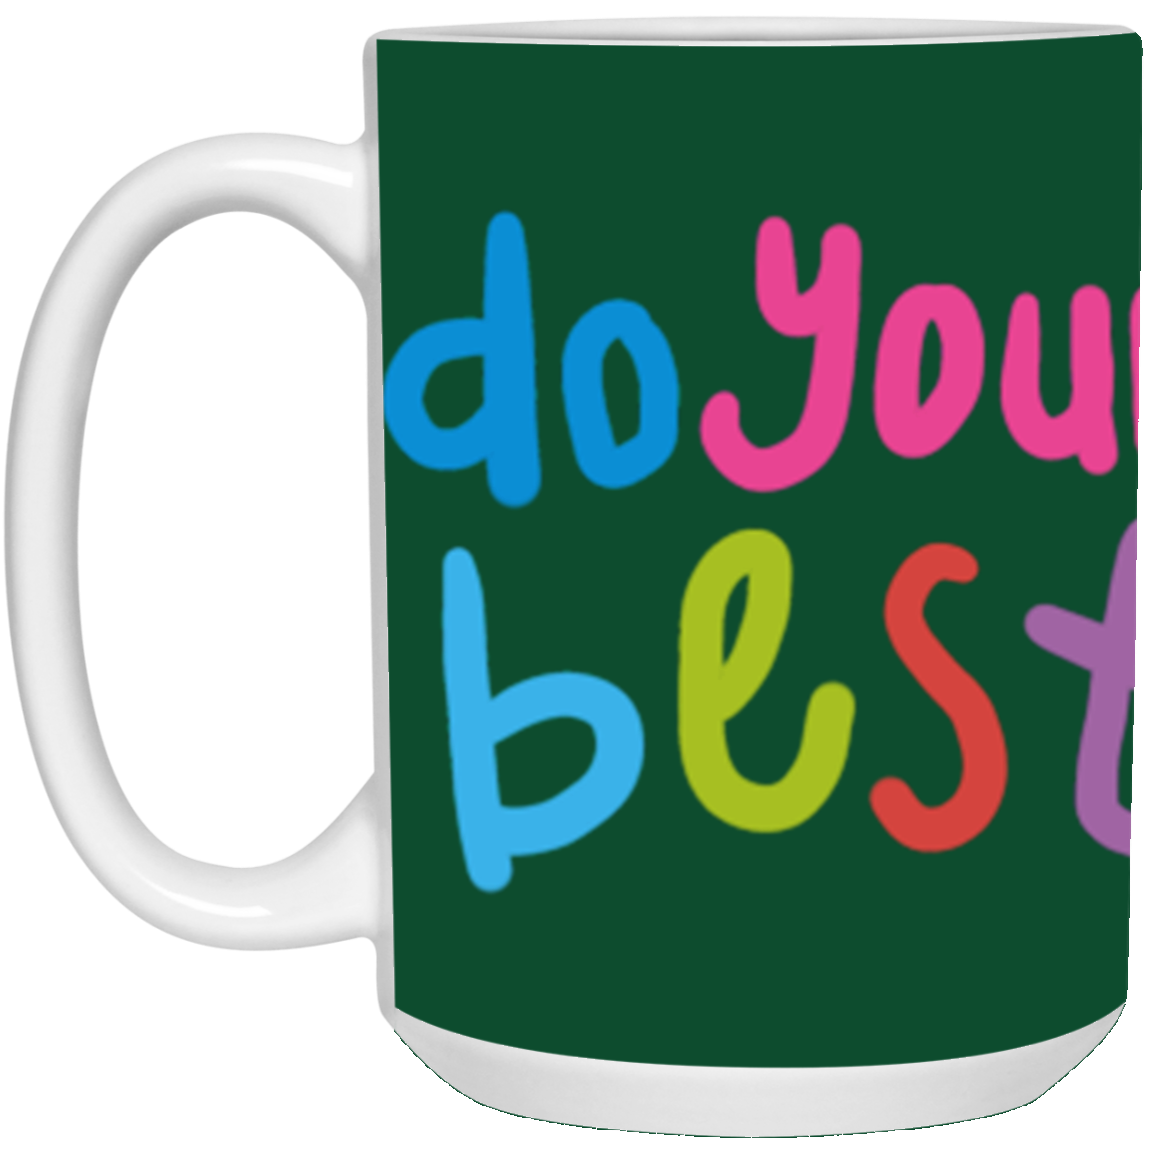 DO YOUR BEST JUST DO IT-MUGS